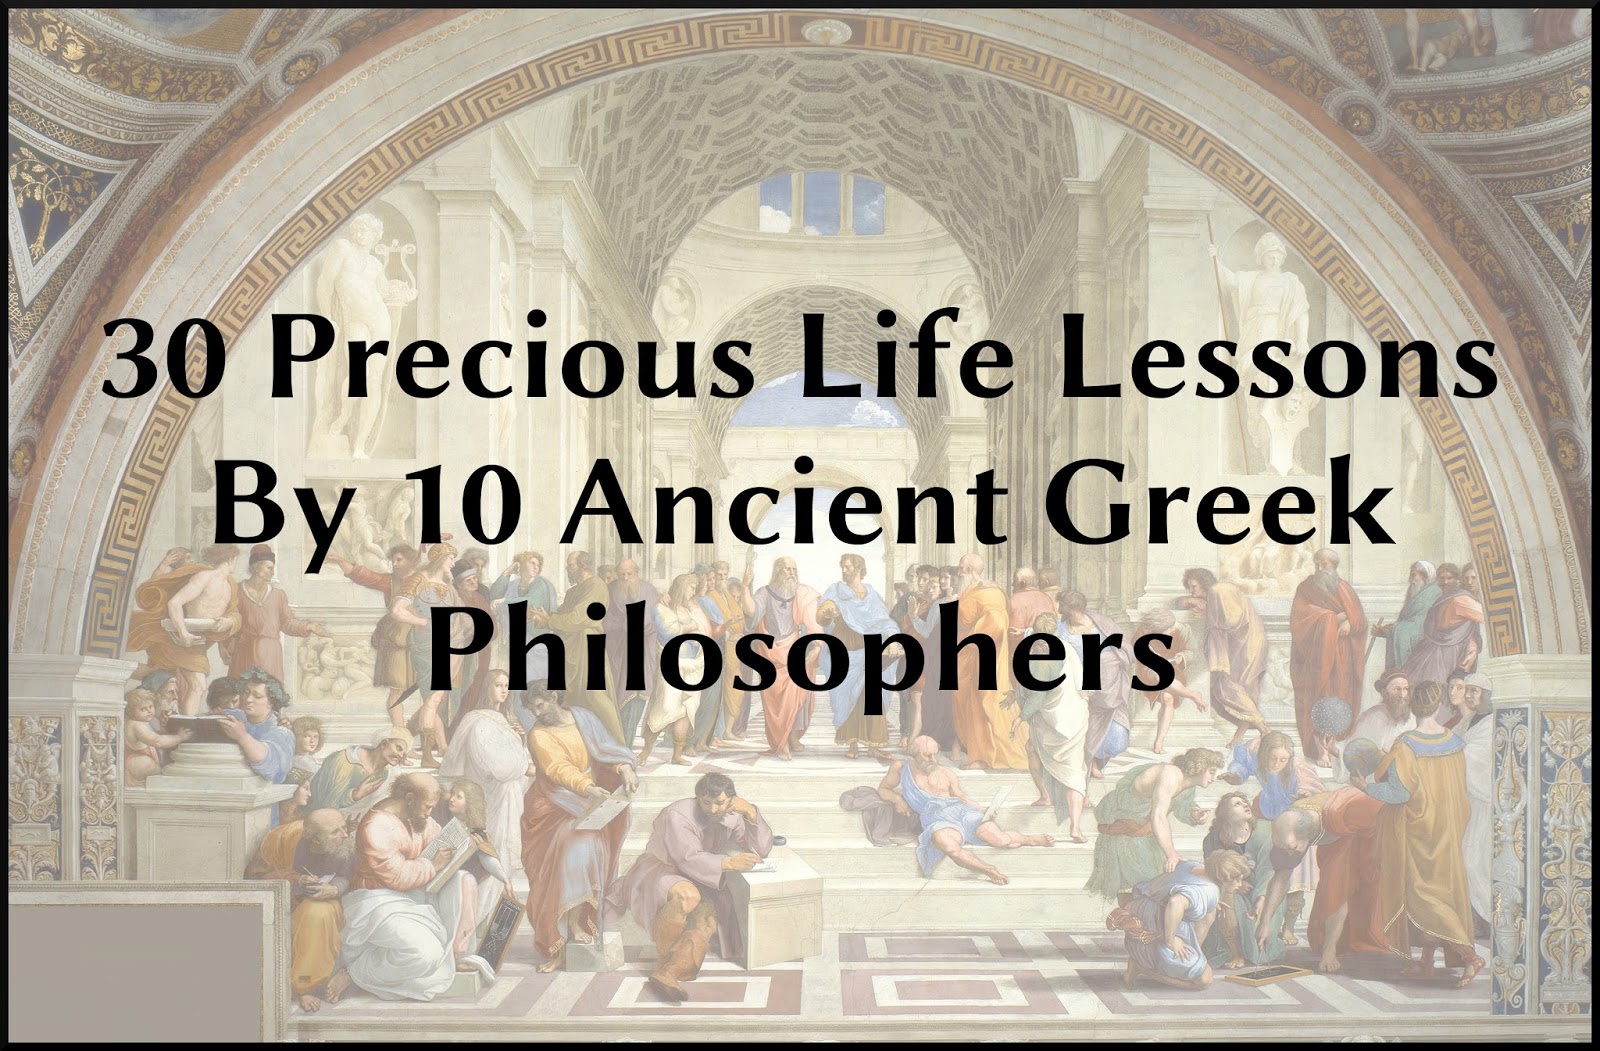 30 Precious Life Lessons By 10 Ancient Greek Philosophers